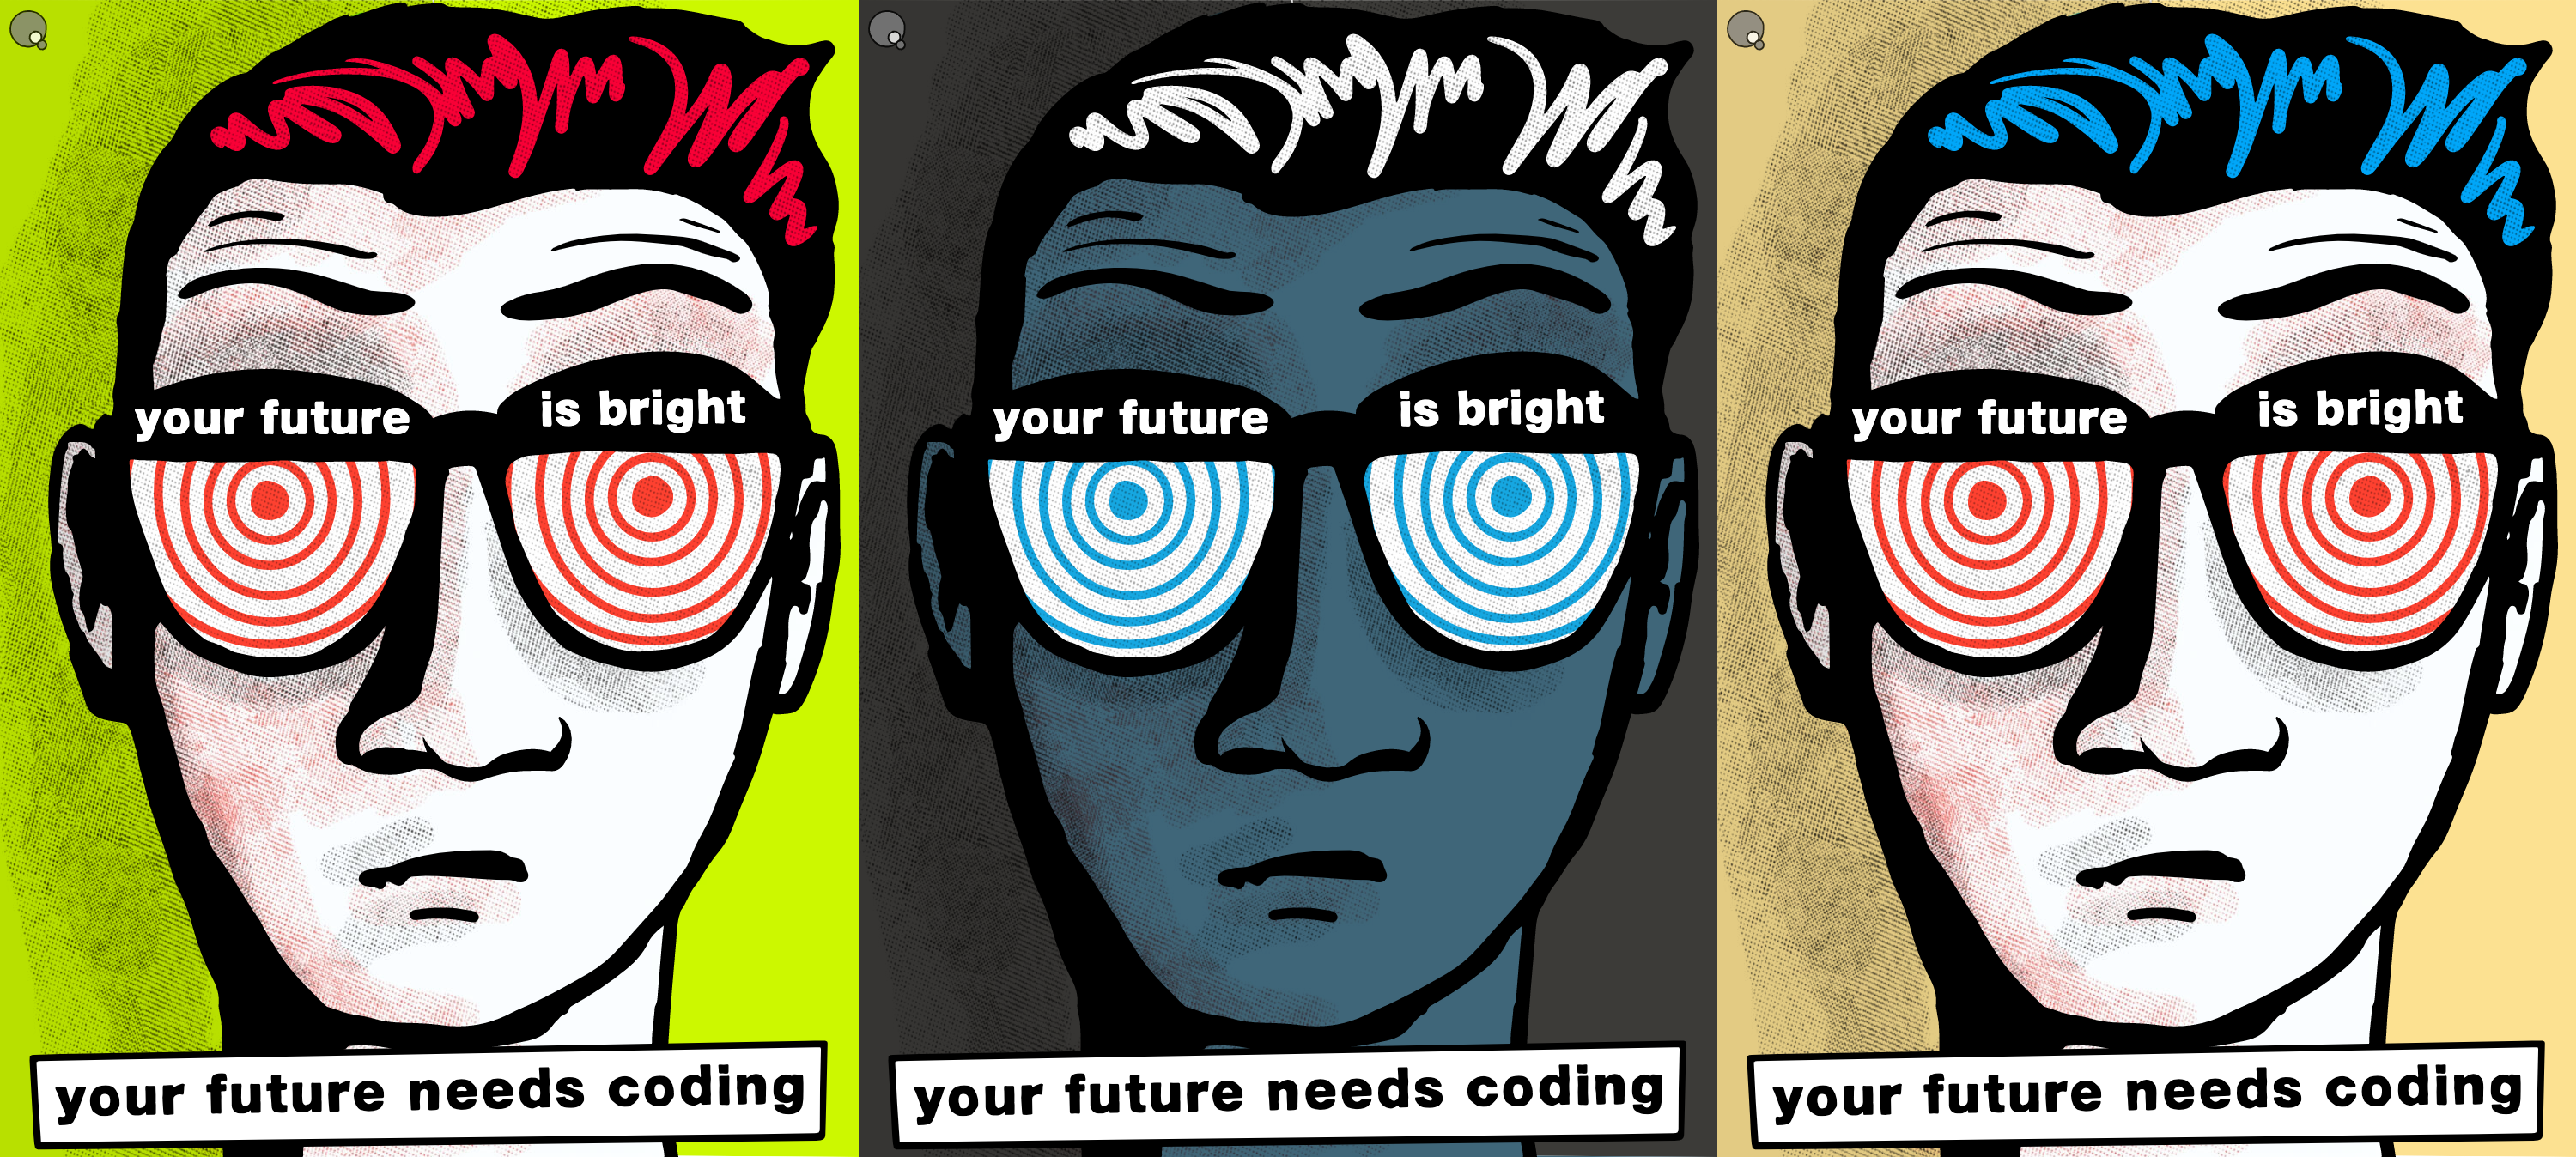 Your future is bright, your future needs coding. You’re doing alright, getting good grades, the future’s so bright, you gotta wear shades. (MacDonald 1986) Shades by Visual Thinkery is licensed under CC BY-SA, remixed by Yours Truly. Make your own at remixer.visualthinkery.com/a/xrayspecs